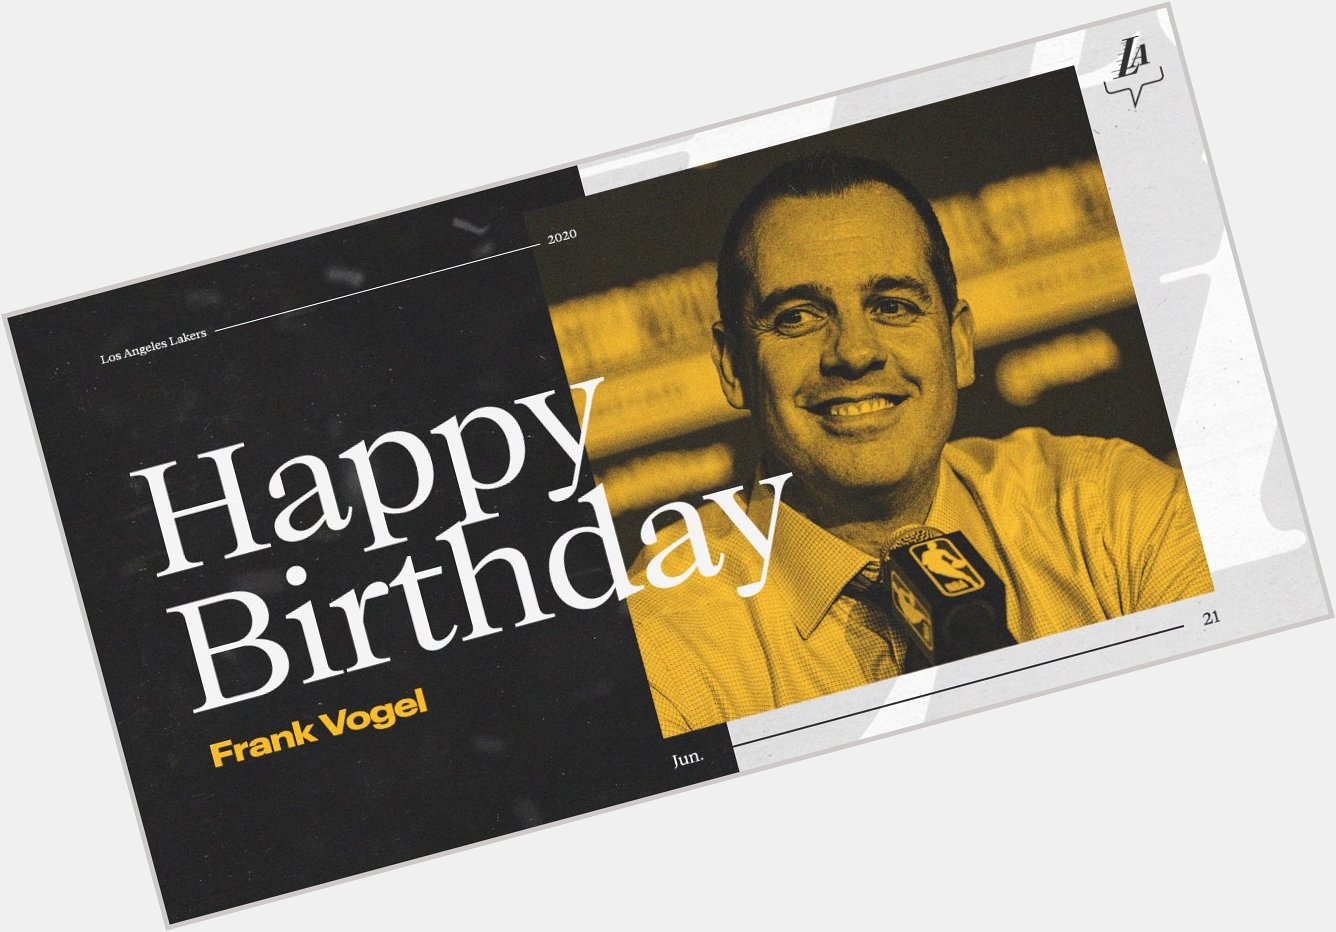 Happy birthday to our head coach, Frank Vogel! 